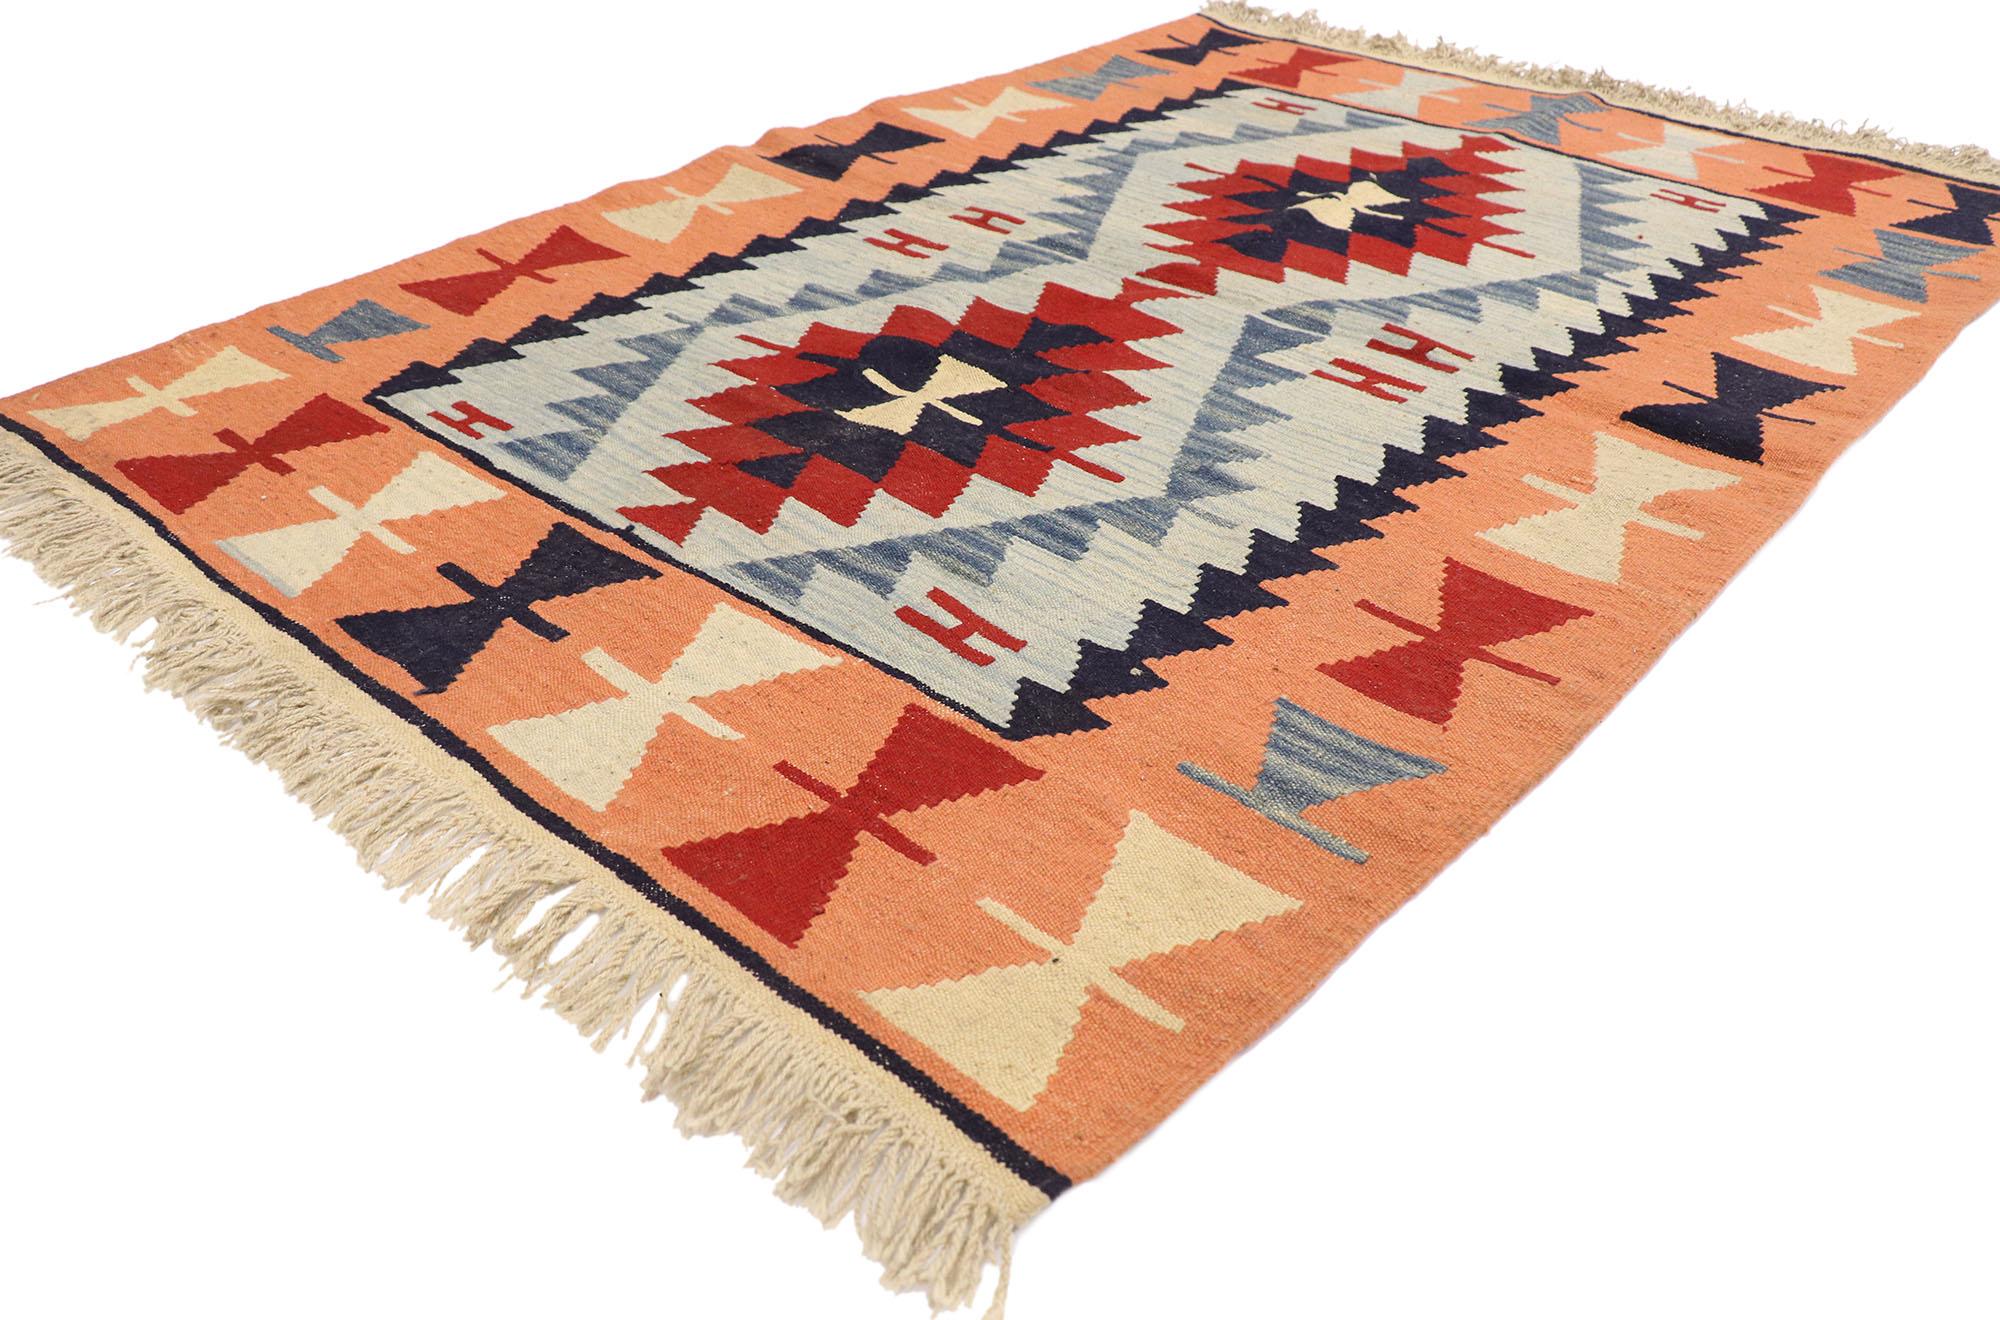 77994 Vintage Persian Shiraz Kilim rug with Bohemian Style 03'11 x 05'08. Full of tiny details and a bold expressive tribal design combined with vibrant colors and bohemian style, this hand-woven wool vintage Persian Shiraz kilim rug is a